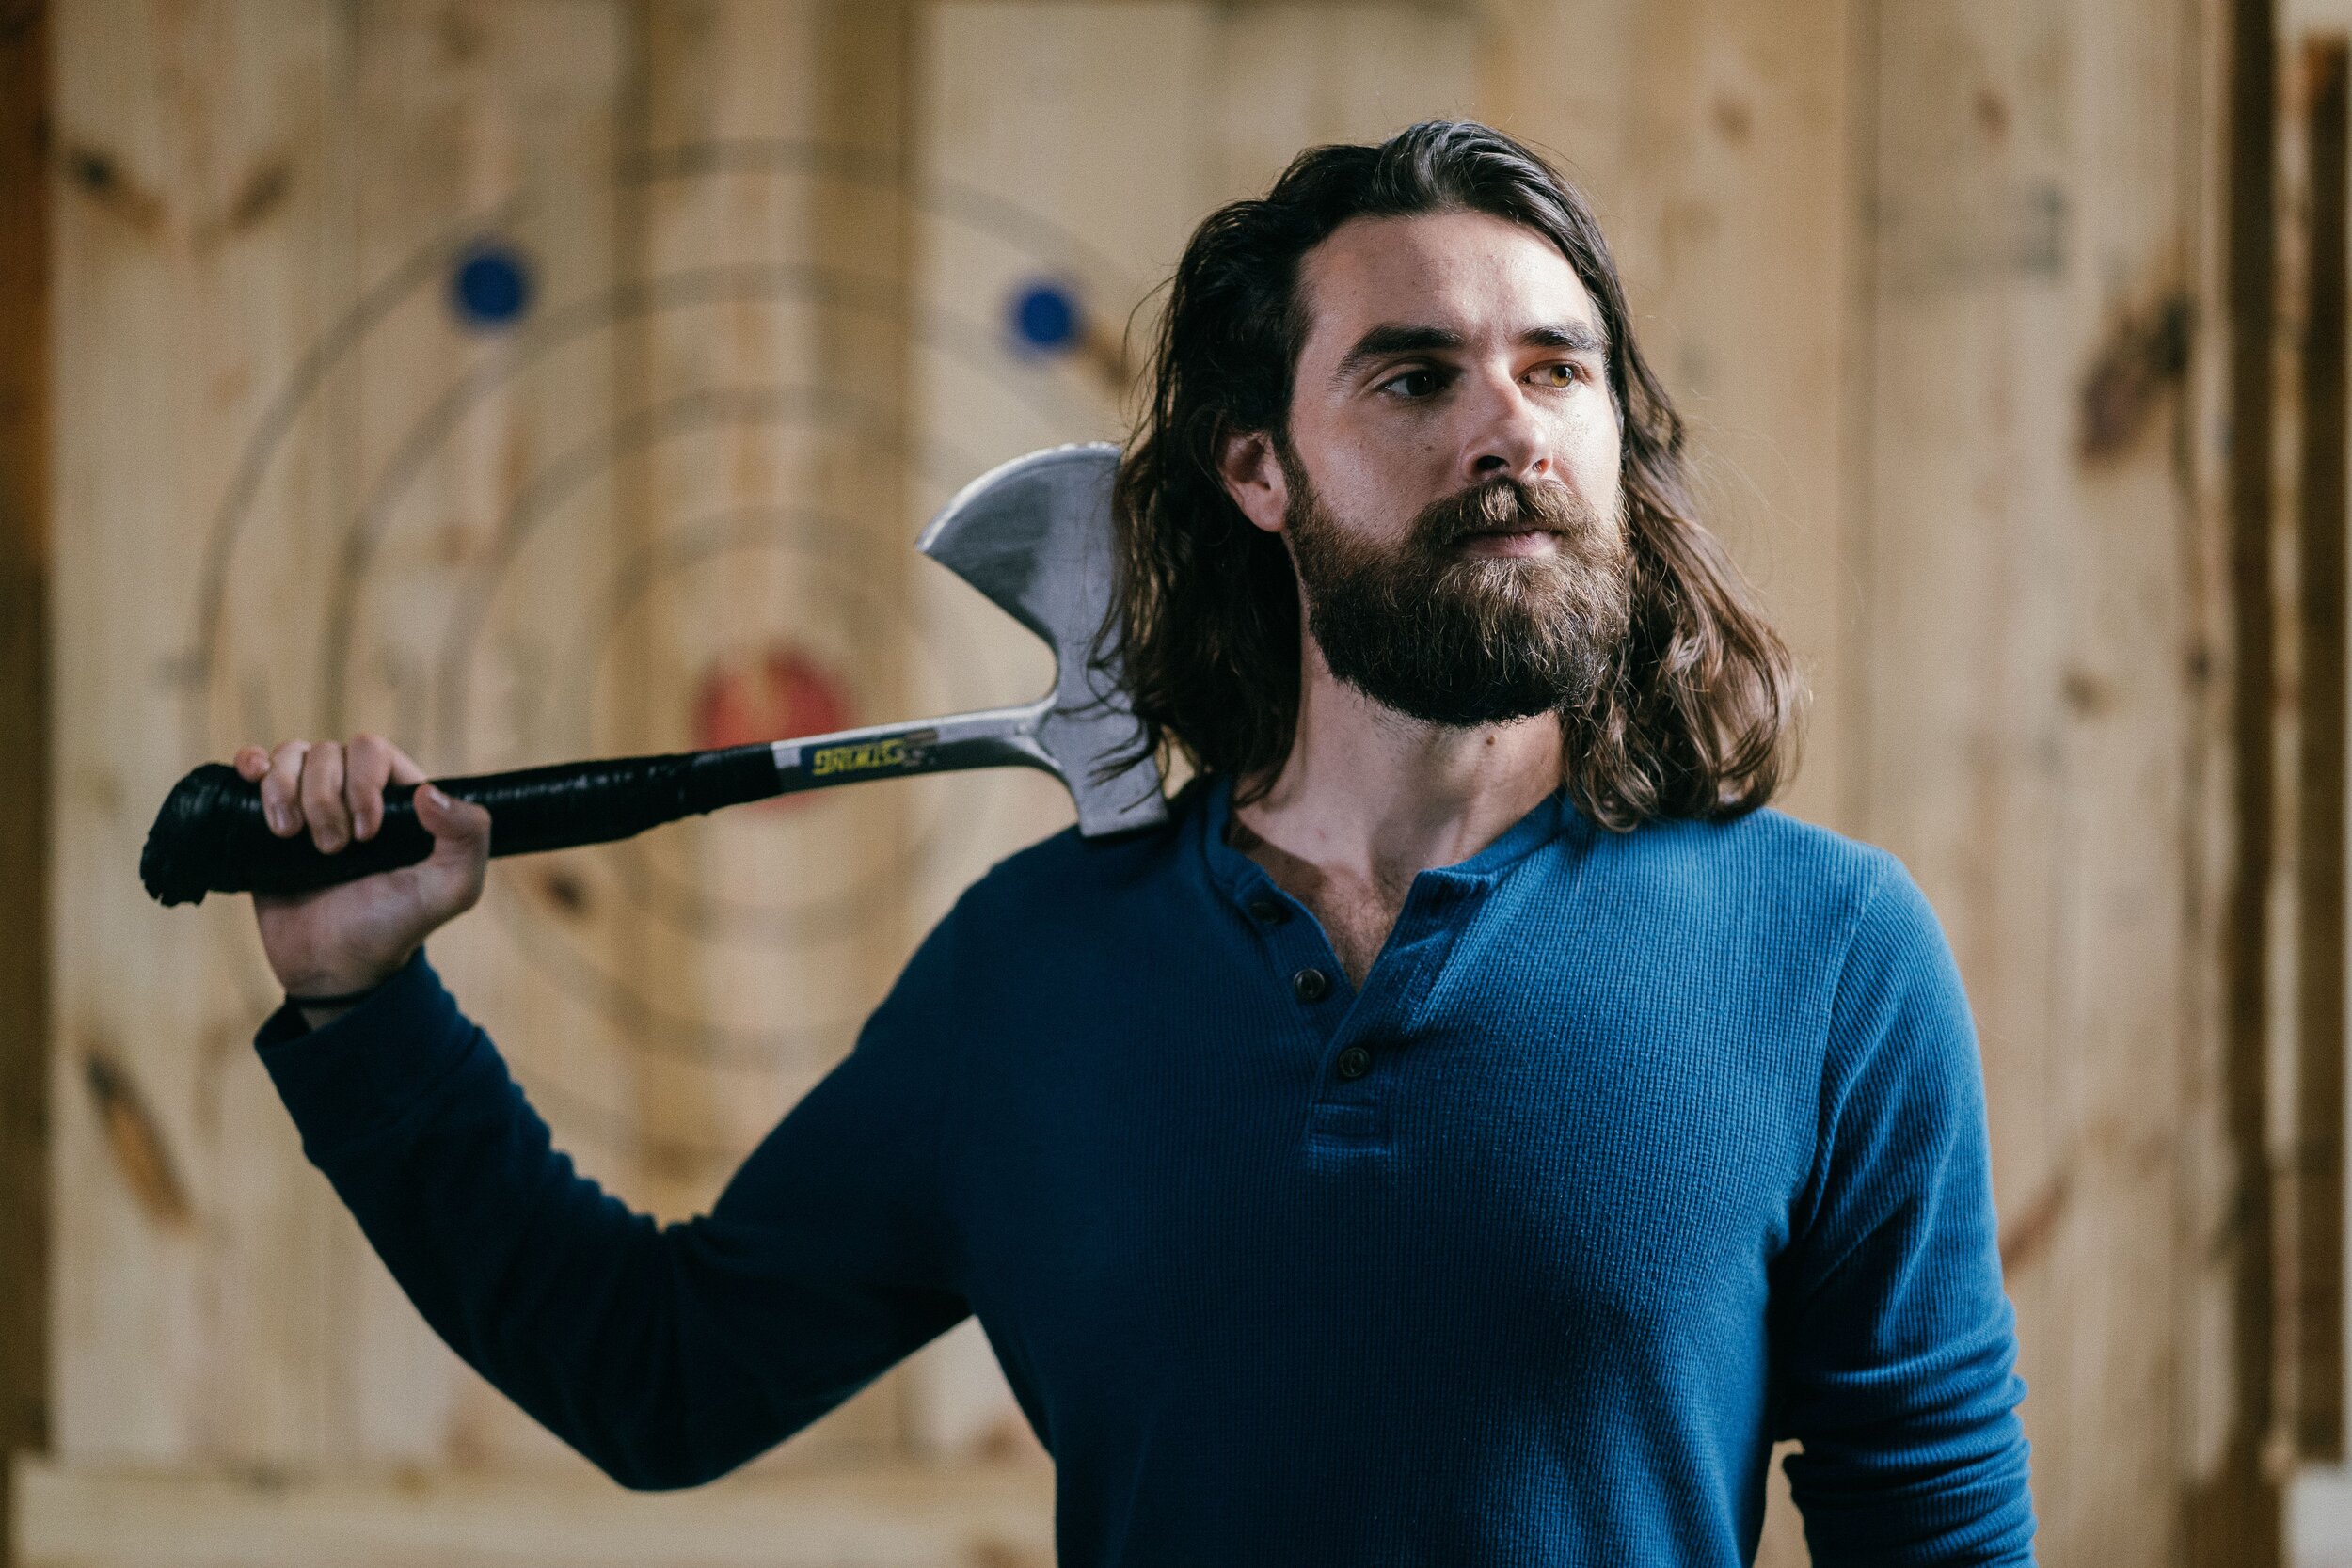 Throw Inc. in Atlanta | Throw Axes, Knives, Stars, Cards and So Much More